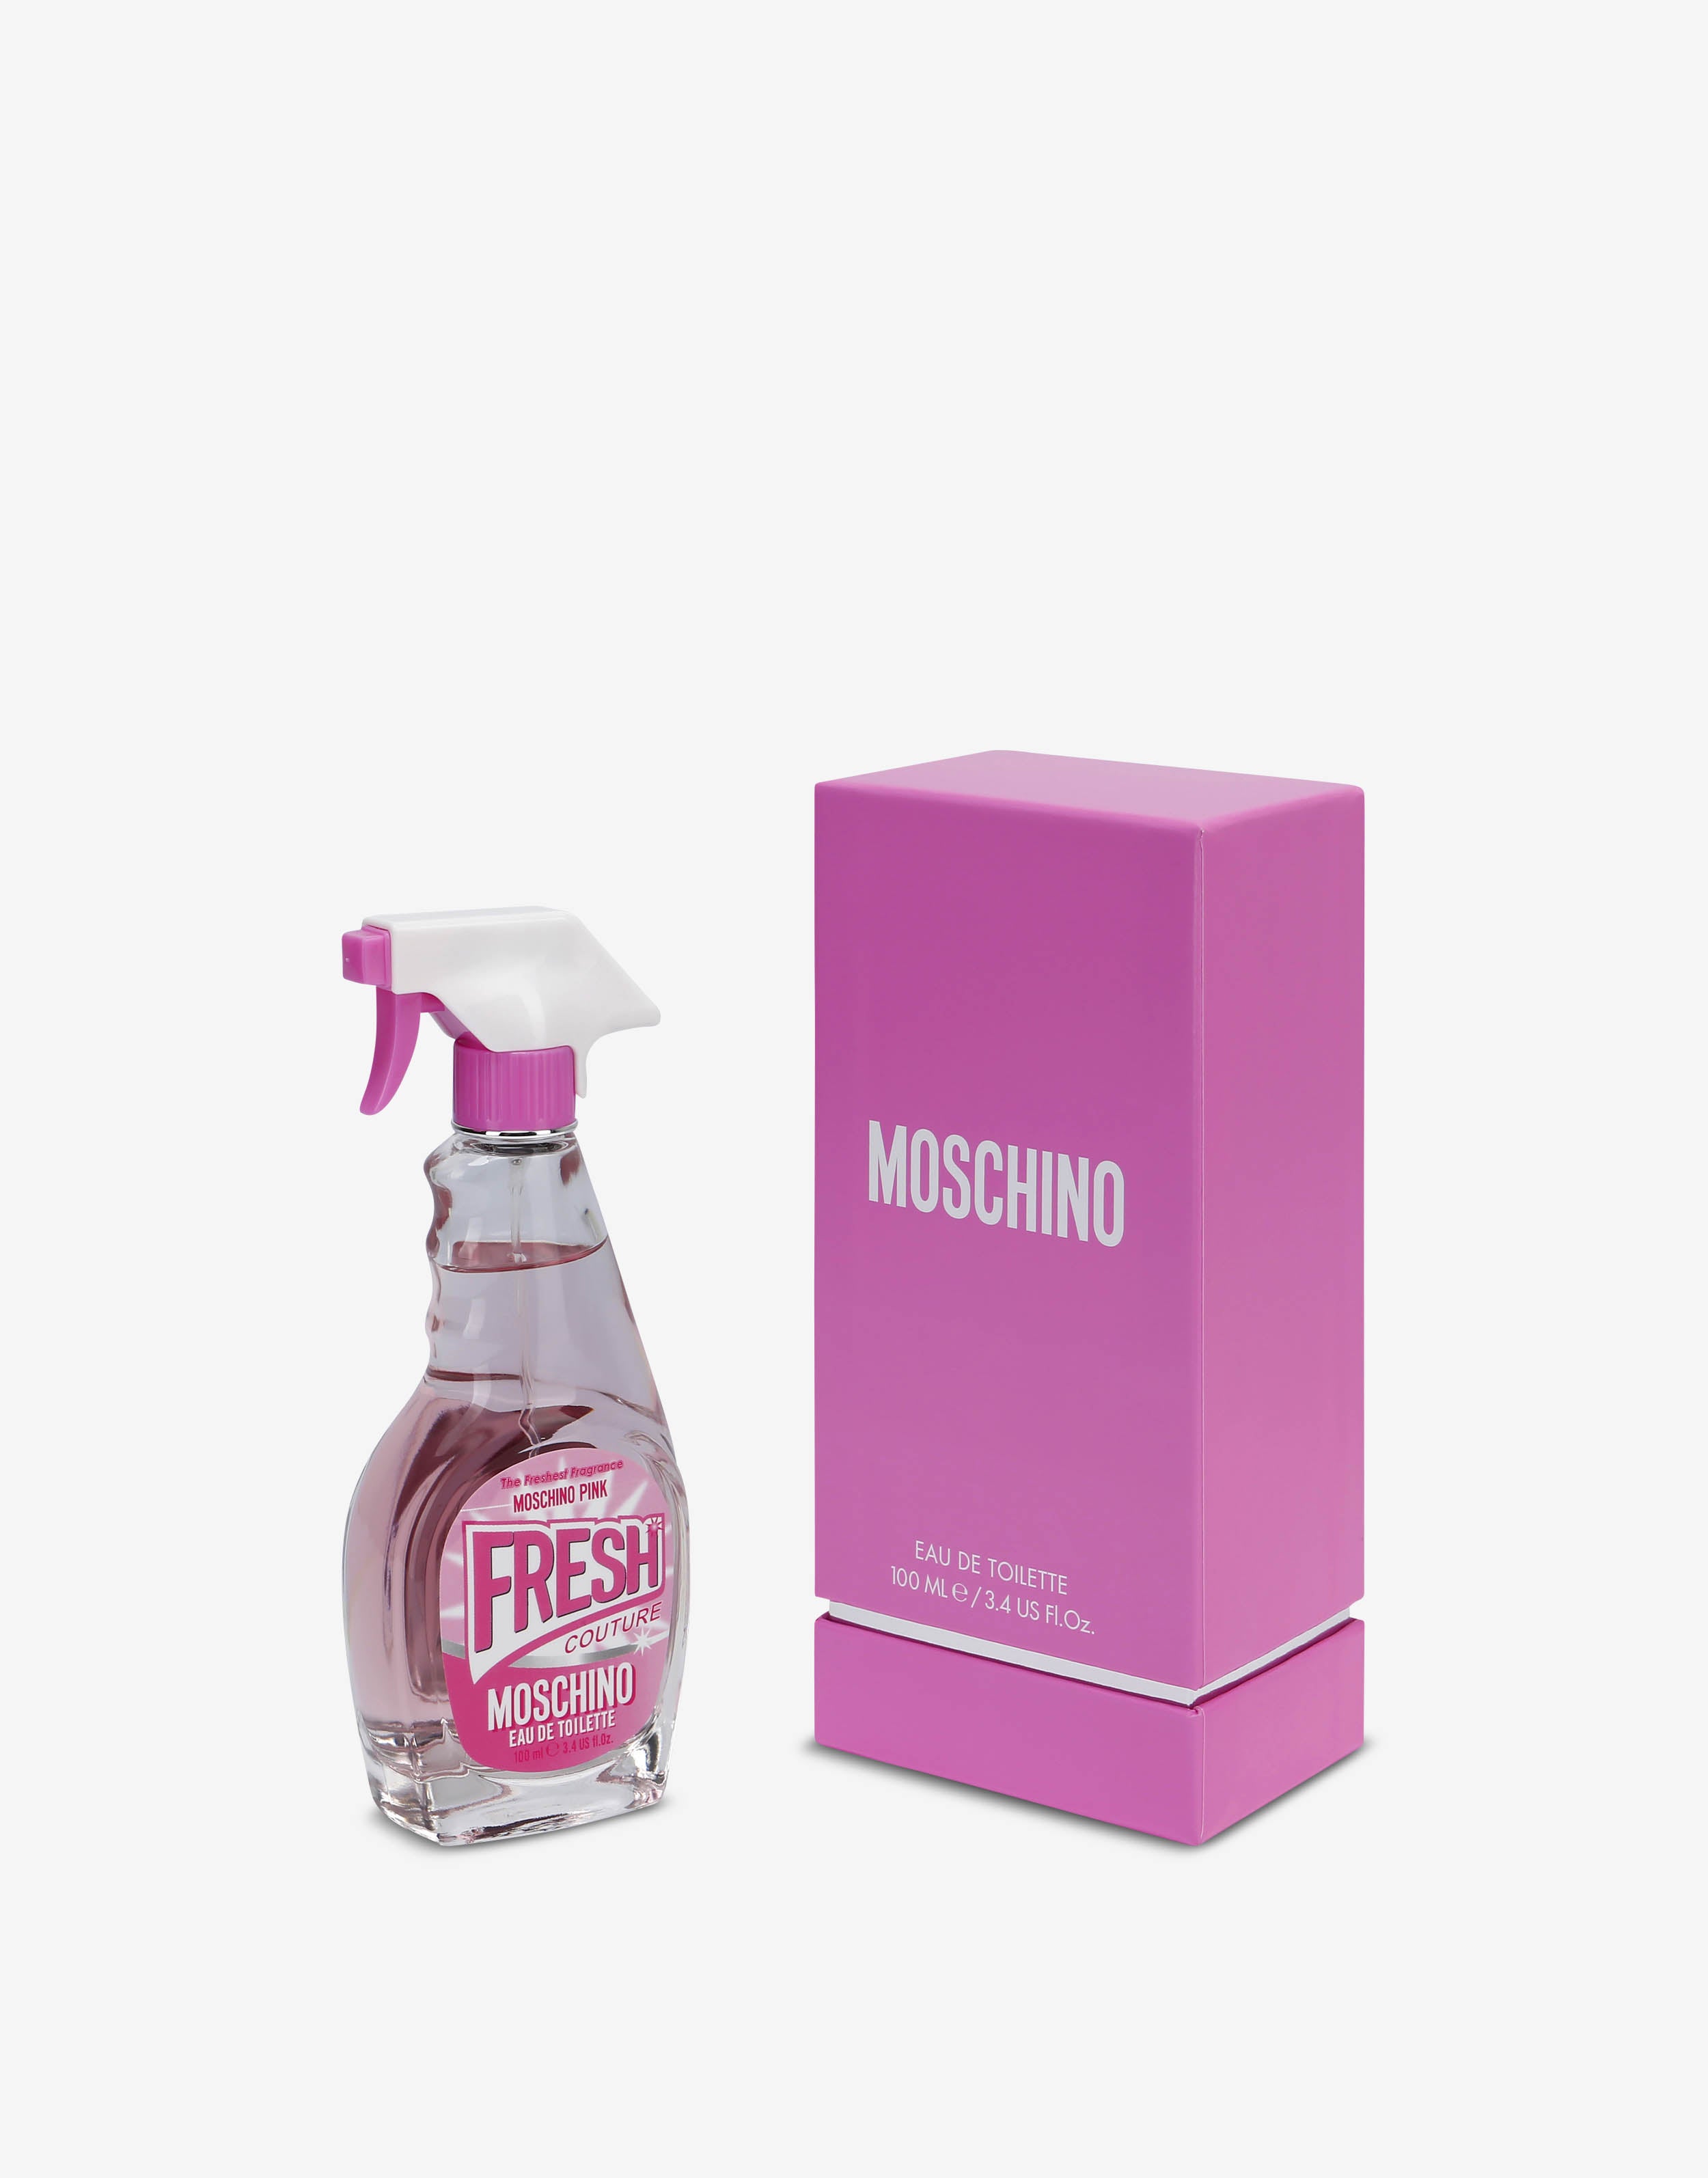 MOSCHINO FRESH COUTURE PINK 3.4oz EDT SP TS (L) NO CAP